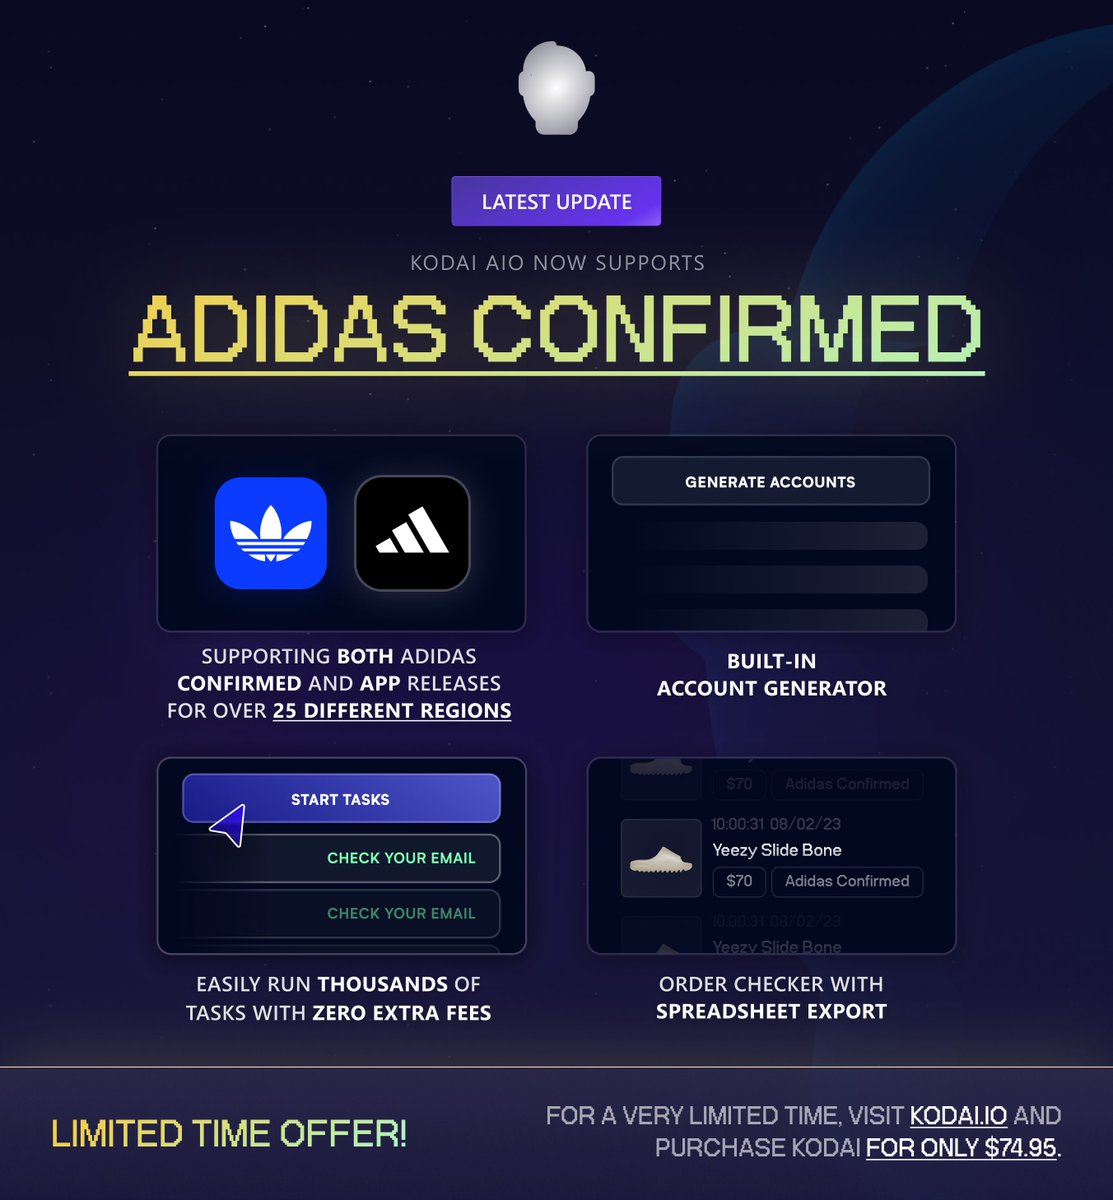 ADIDAS CONFIRMED has now been added to Kodai! 🥳 Just in time for the PACKED month of YEEZYS. 😈 👥 Built-in account generator. 🌎 Supporting BOTH confirmed and app releases. ⚡️️Run thousands of tasks with no third-party costs. Don't miss out: kodai.io. 🫣